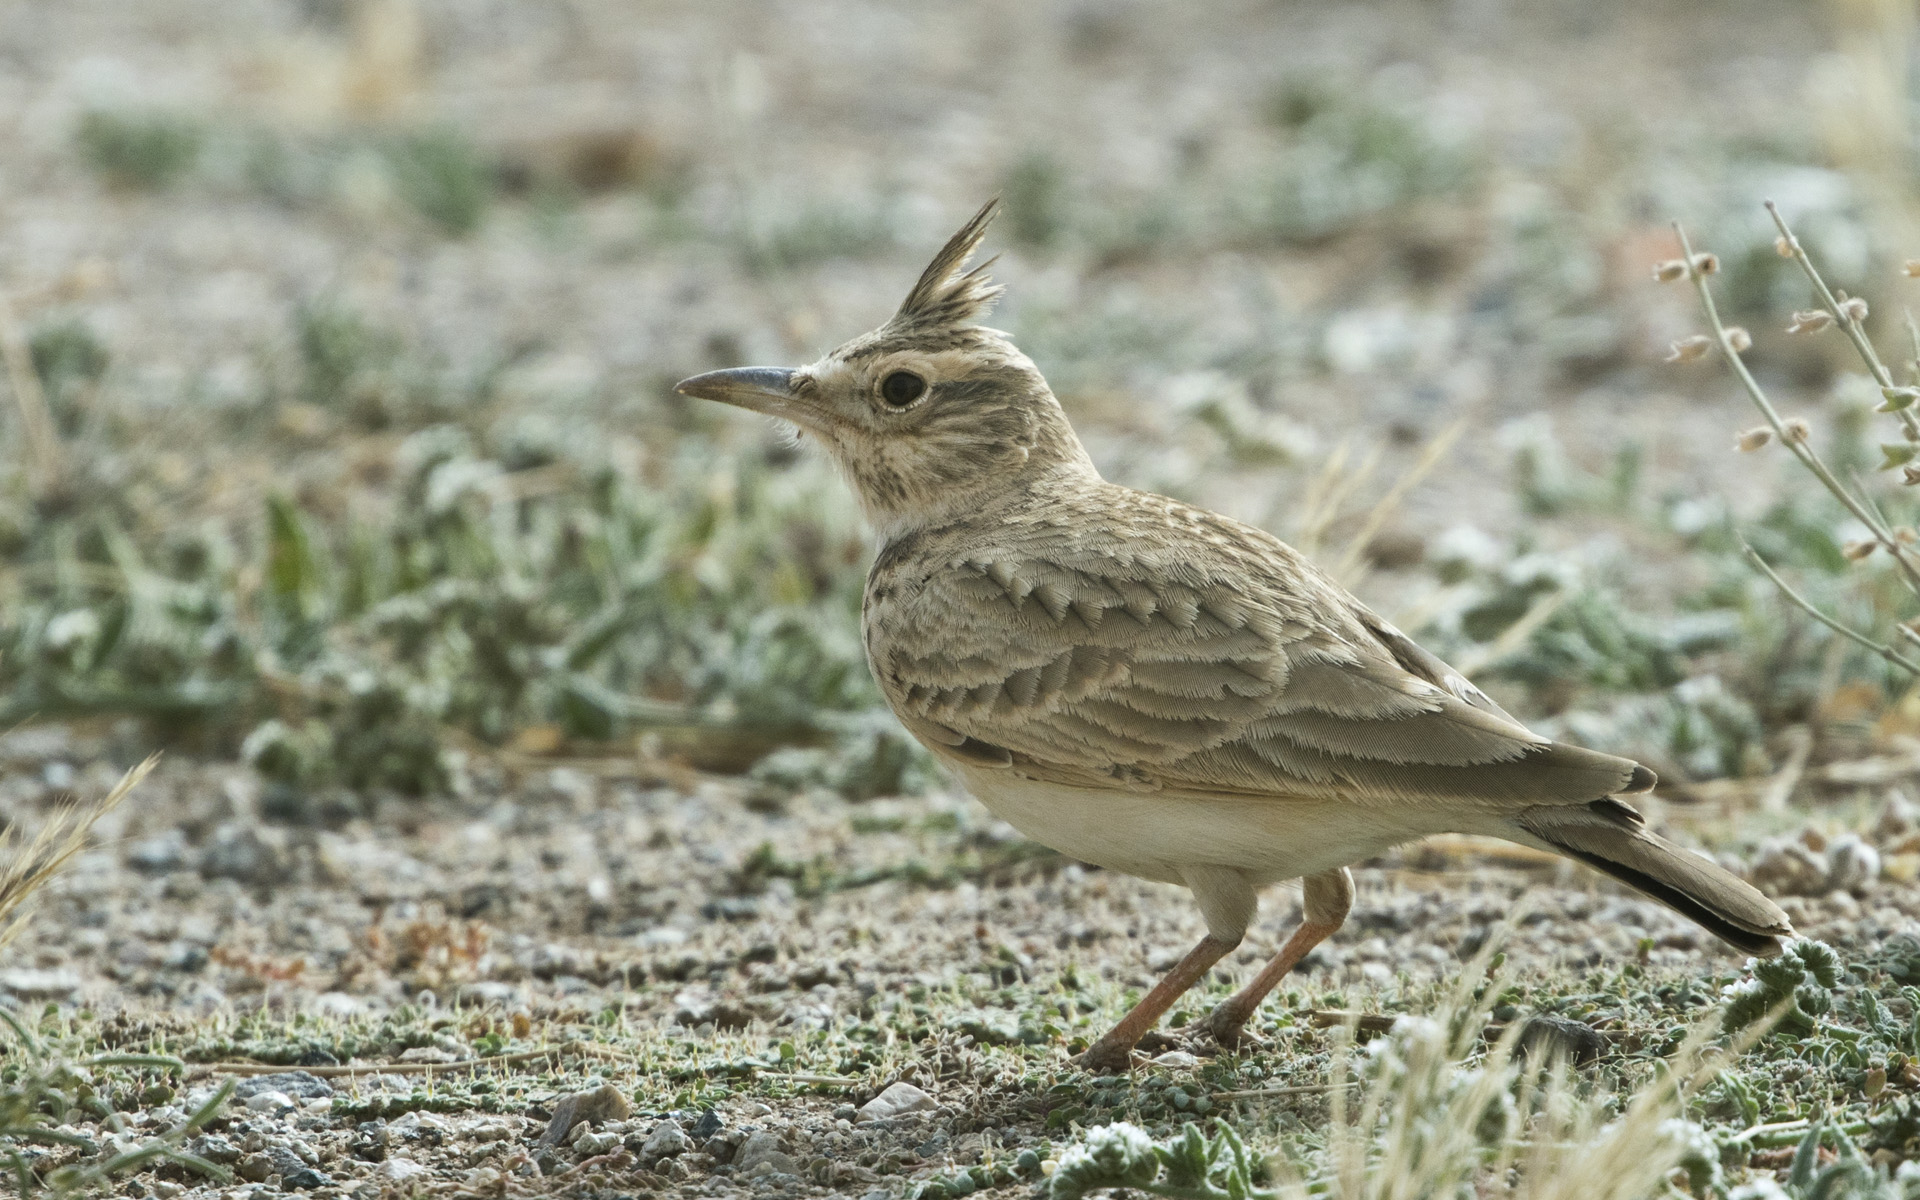 ‘Long-billed’ Crested Lark, probably belonging to the senegallensis group of Galerida cristata, Aousserd, western Sahara, Morocco, 21 Jan. 2018 (Lars Petersson).